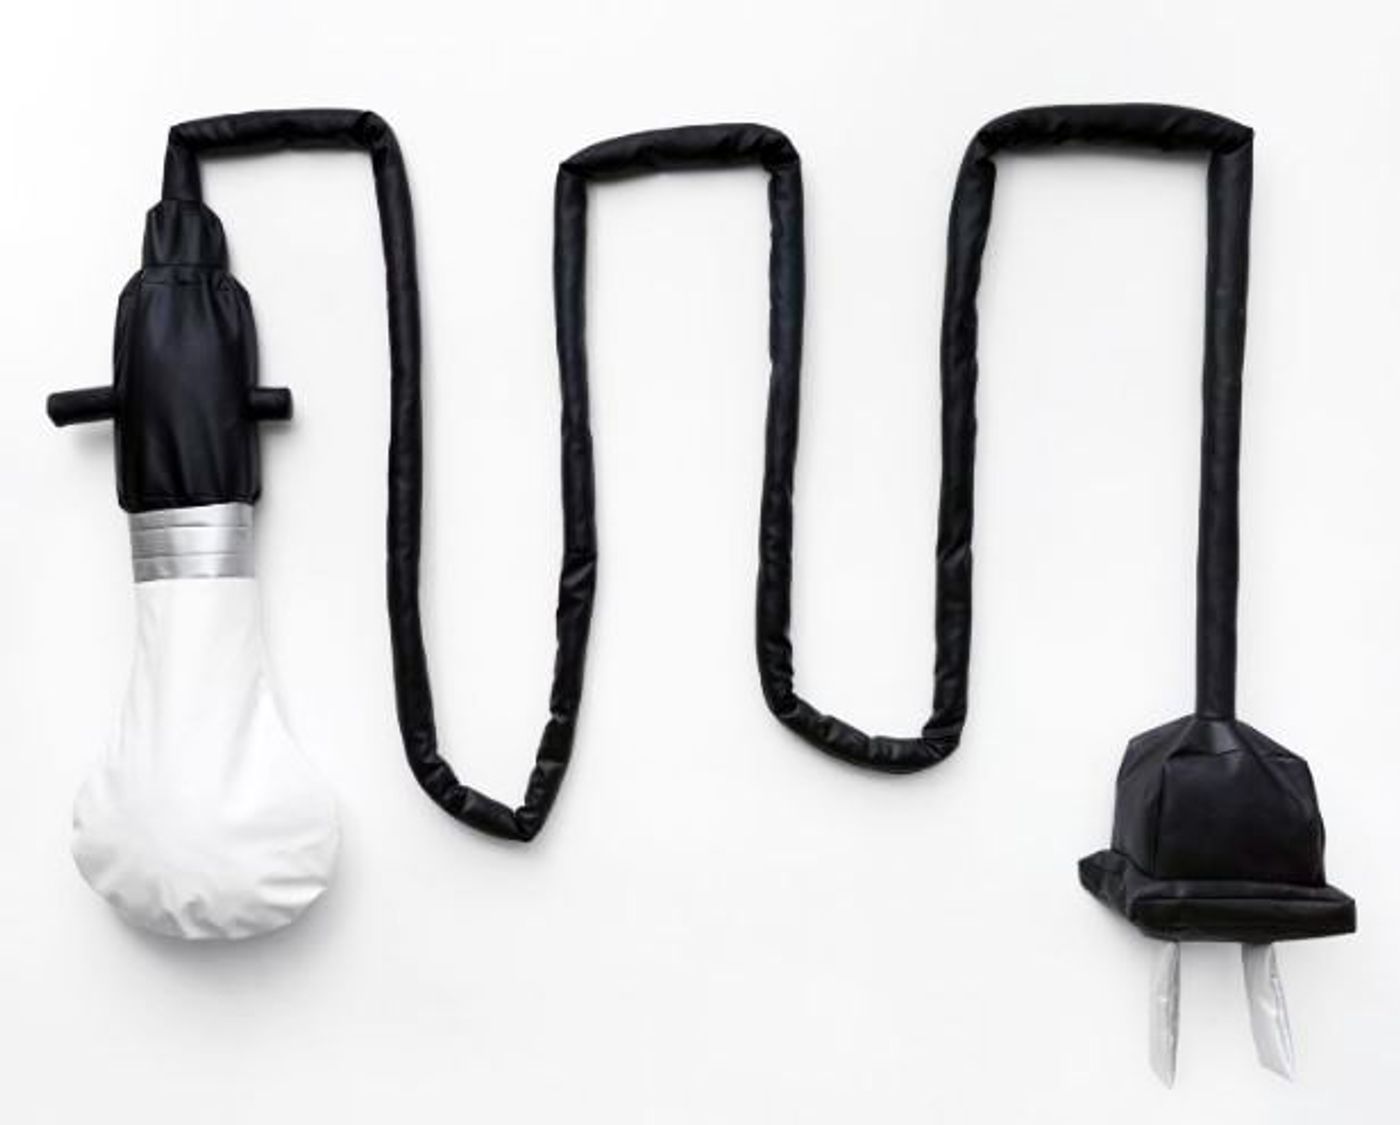 Image of Soft Light Bulb with Black Cord, 2018: Vinyl and polyfill